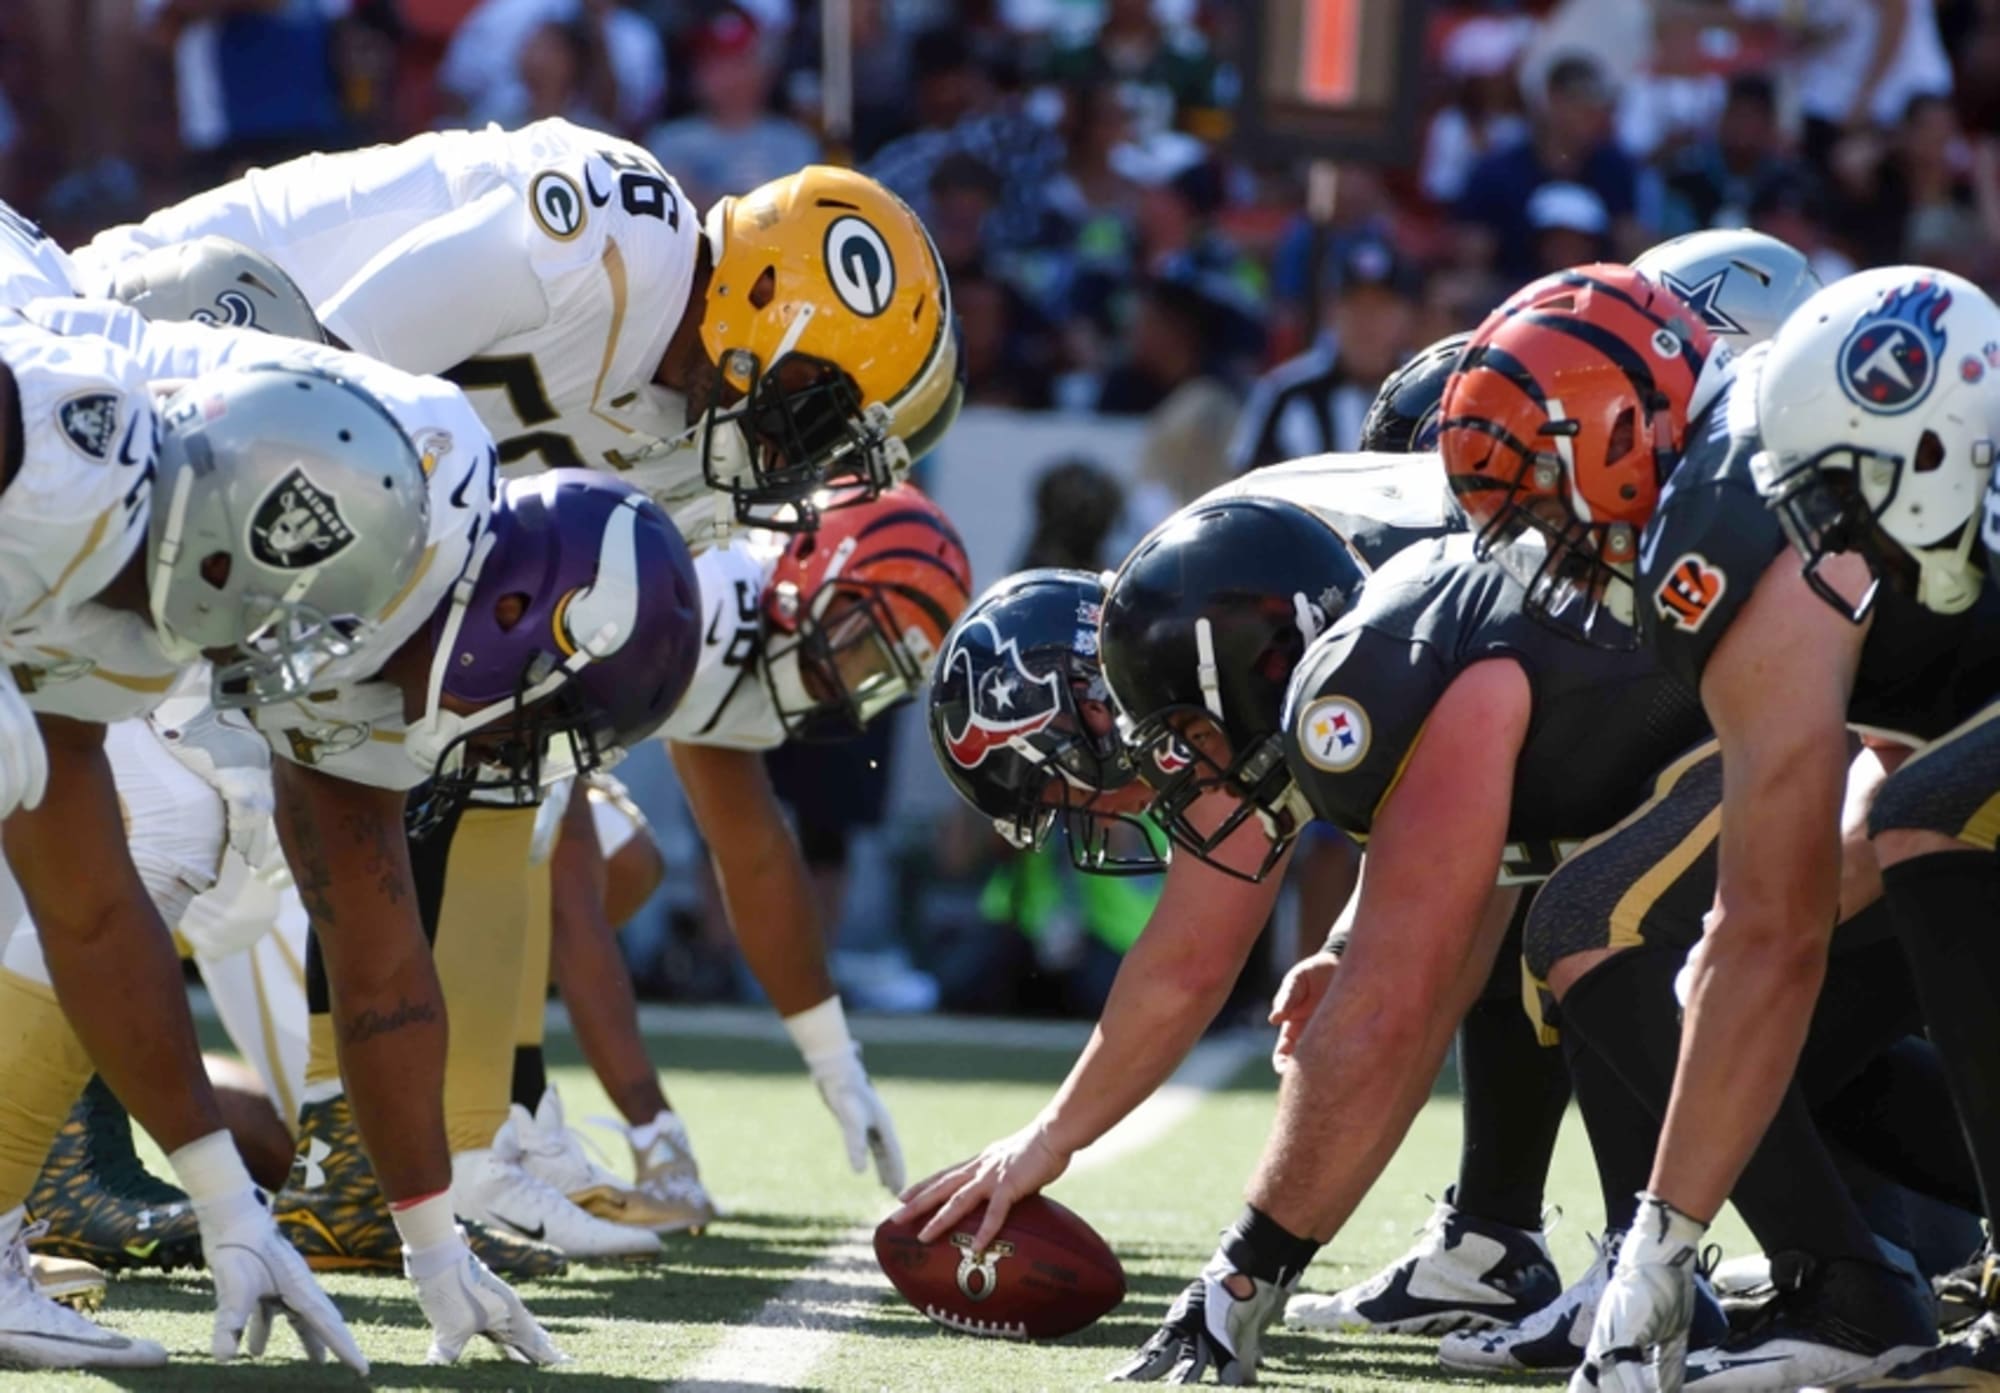 NFL Pro Bowl Lack of Compeition, Viewers Shows Game Needs Change